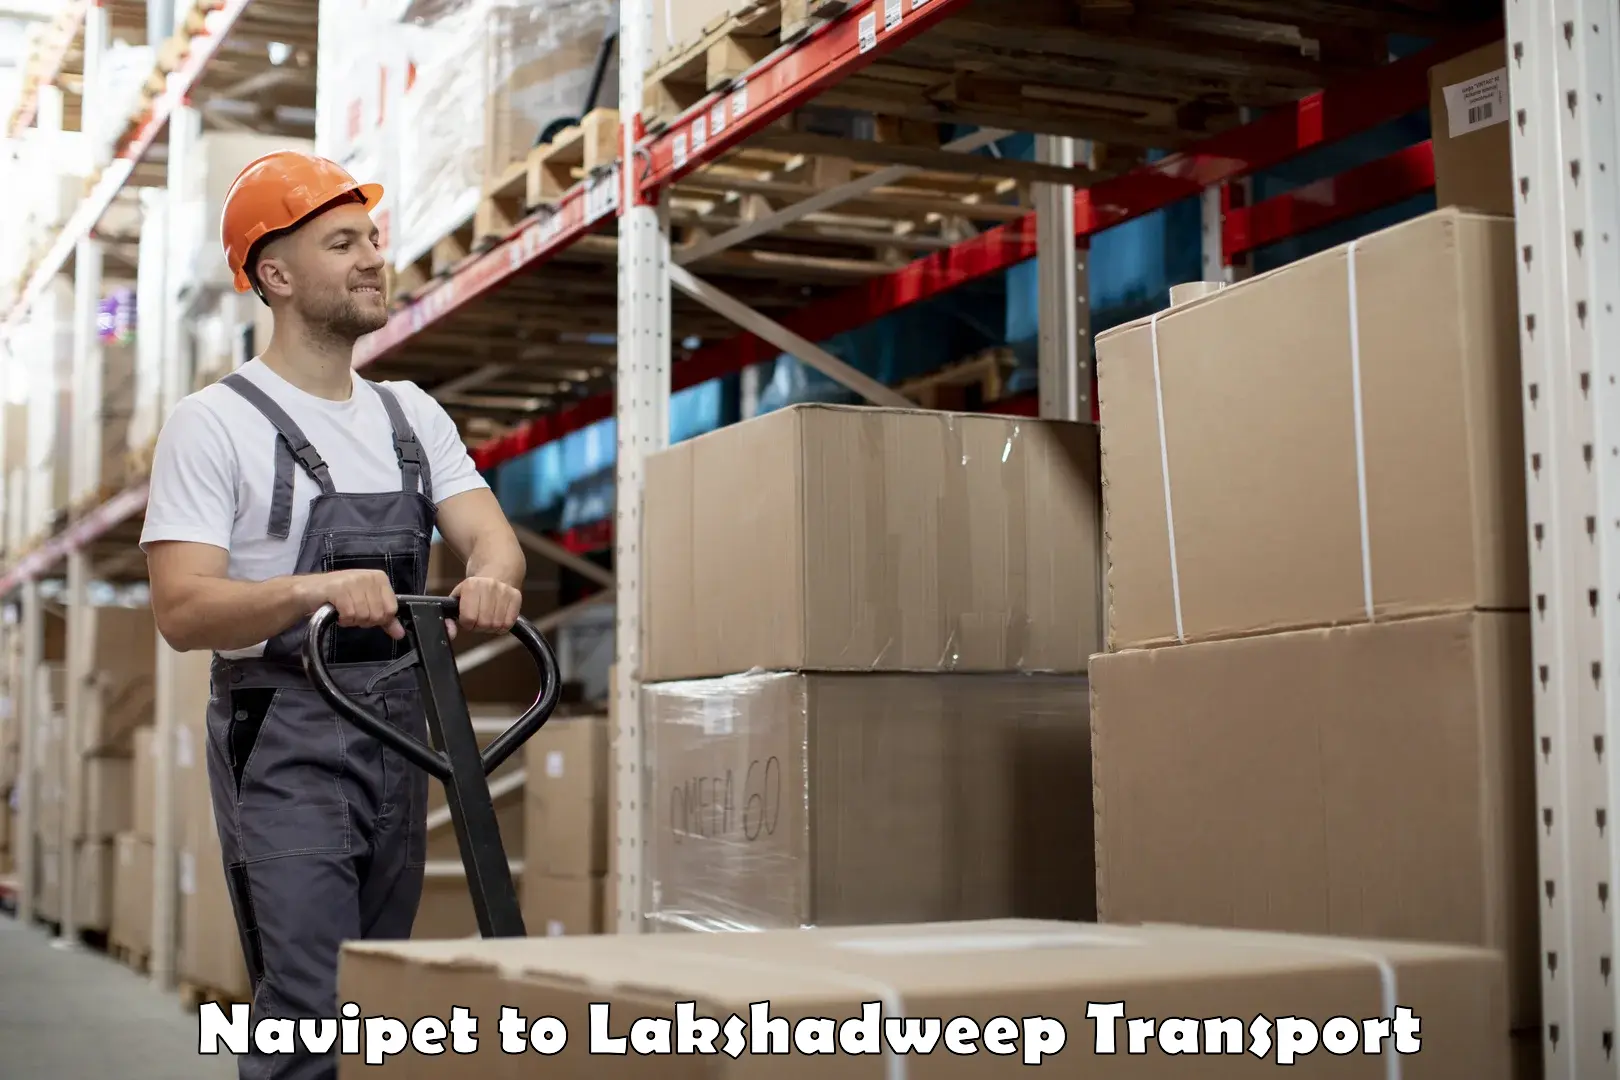 Commercial transport service Navipet to Lakshadweep